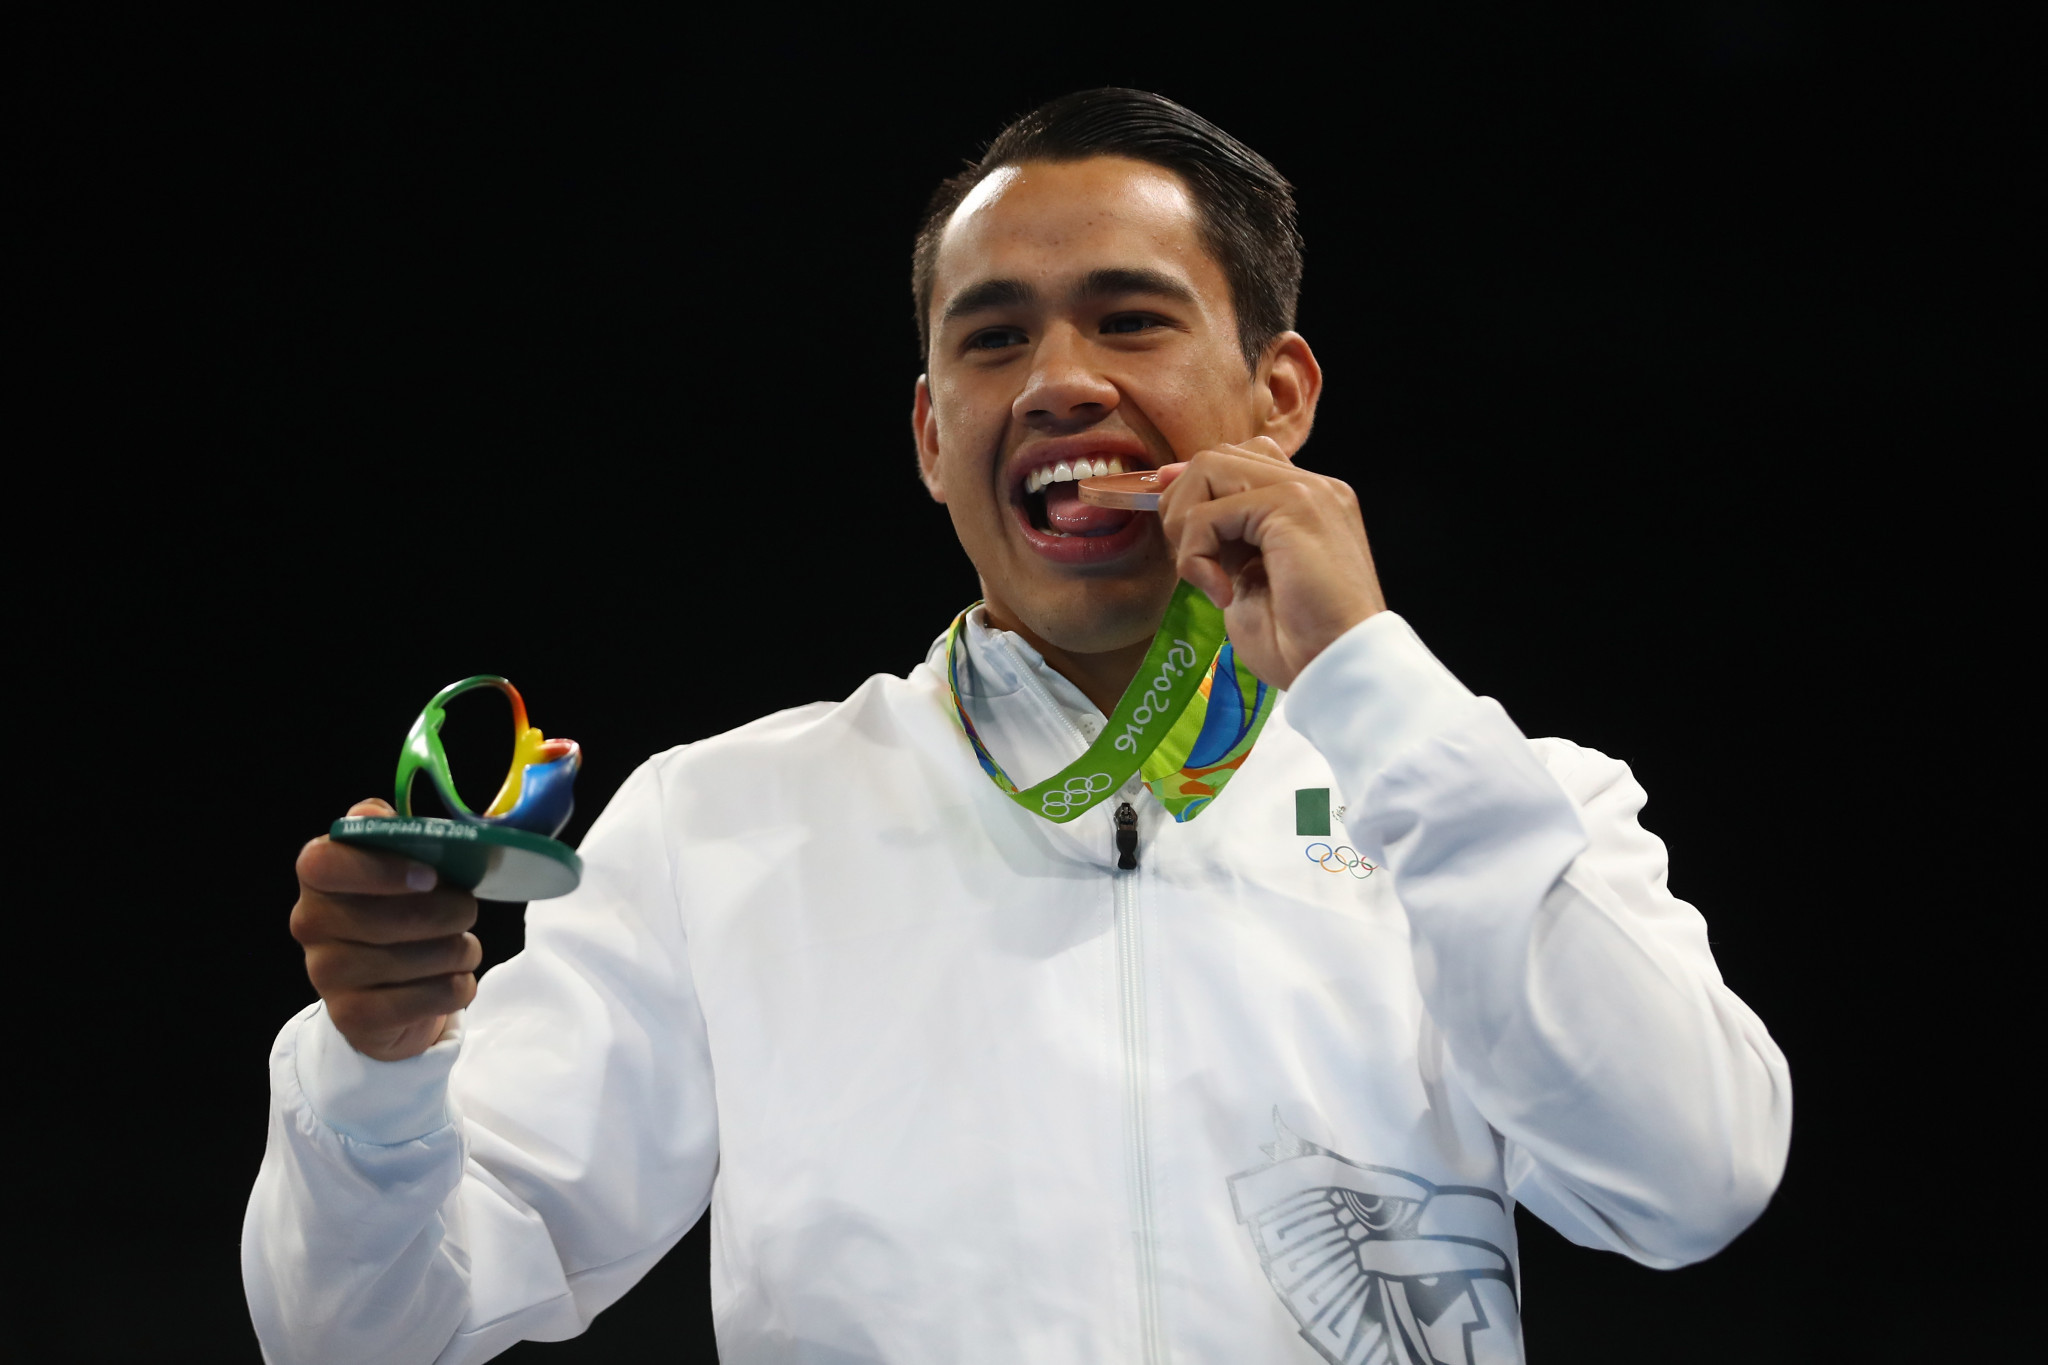 Misael Rodríguez, who was coached by Francisco Bonilla Vázquez, earned Olympic bronze at Rio 2016 ©Getty Images